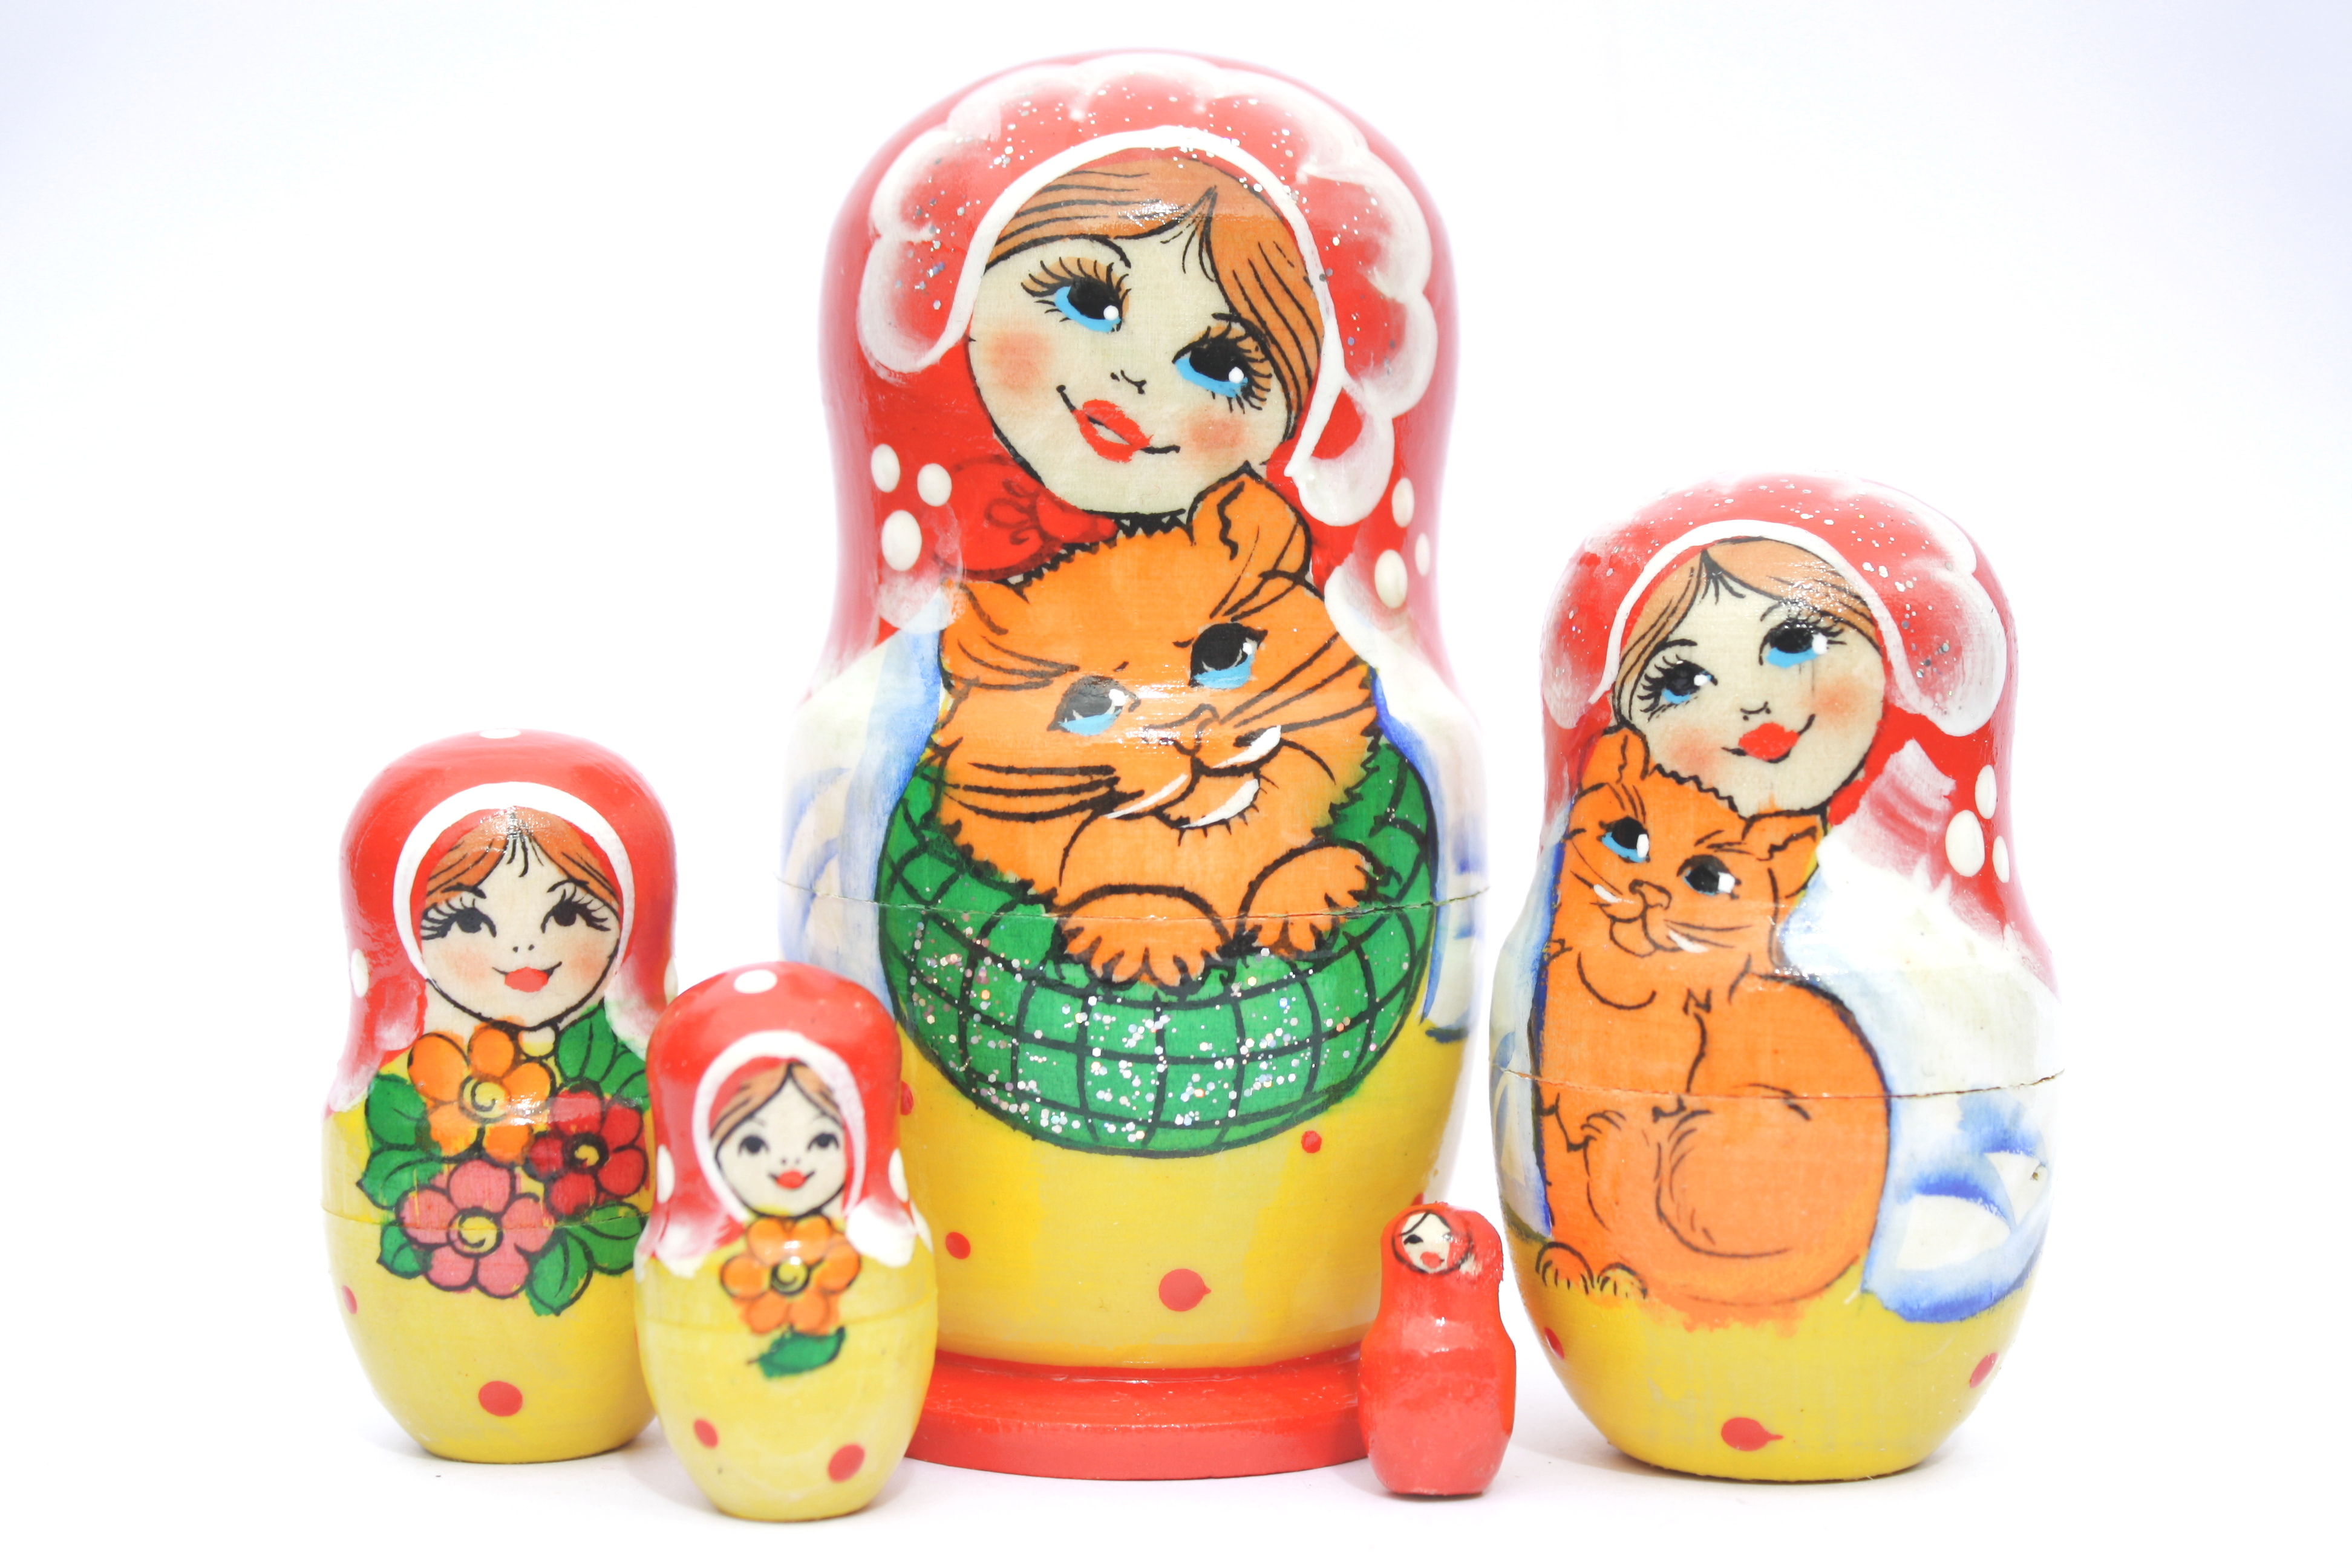 A 5 Nested set of Artists Matryoshka, Yellow with red scarf and cat